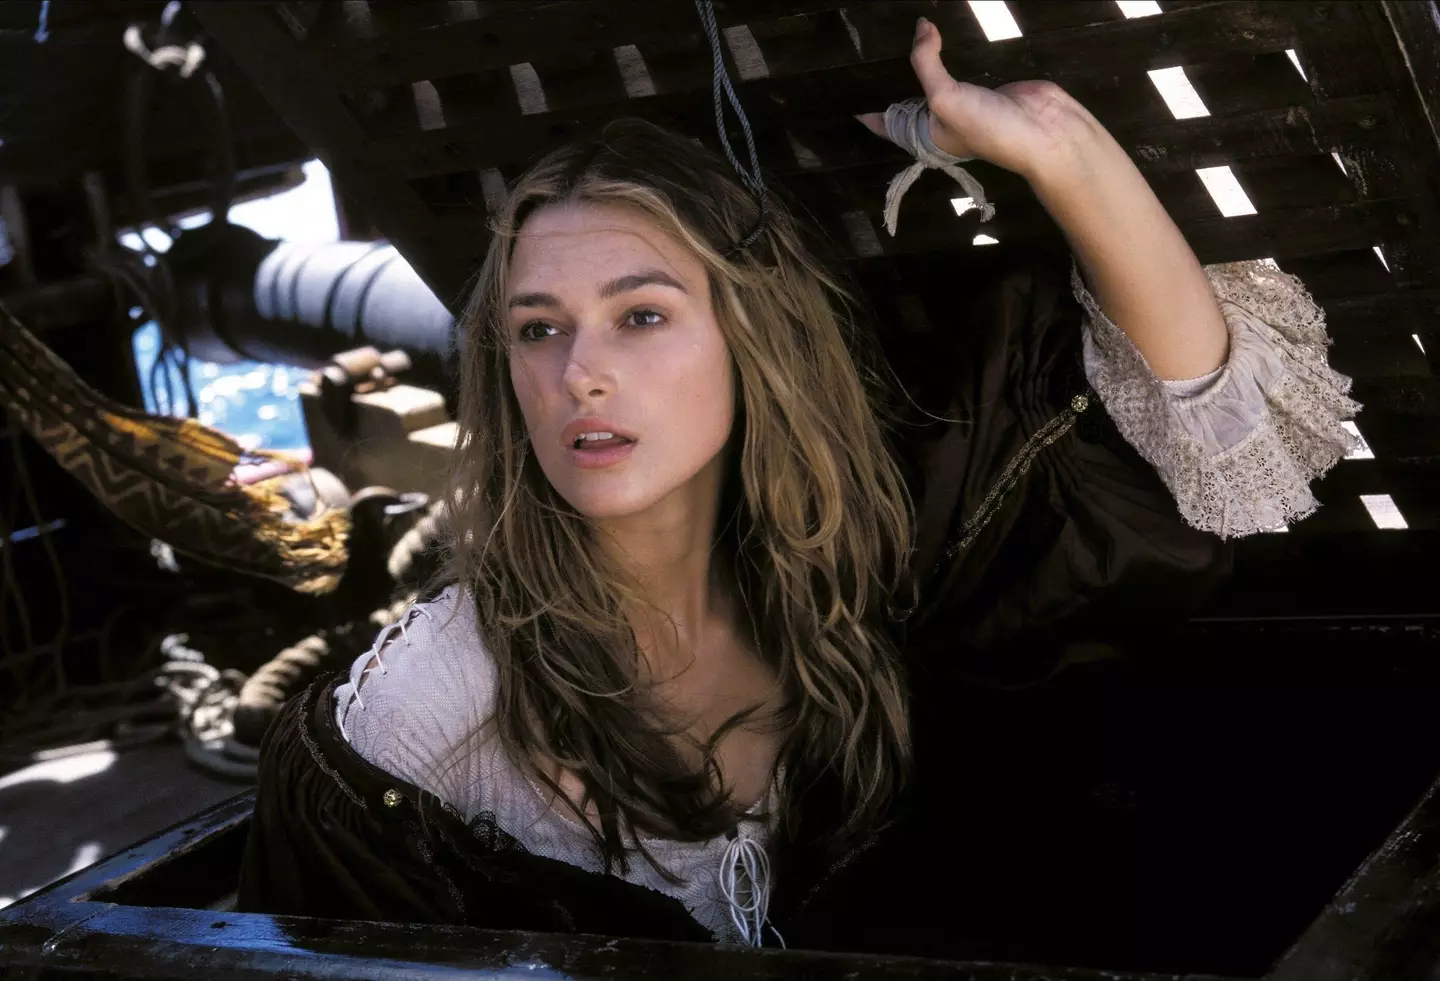 Keira Knightley was just 17 when she first appeared in Pirates of the Caribbean.